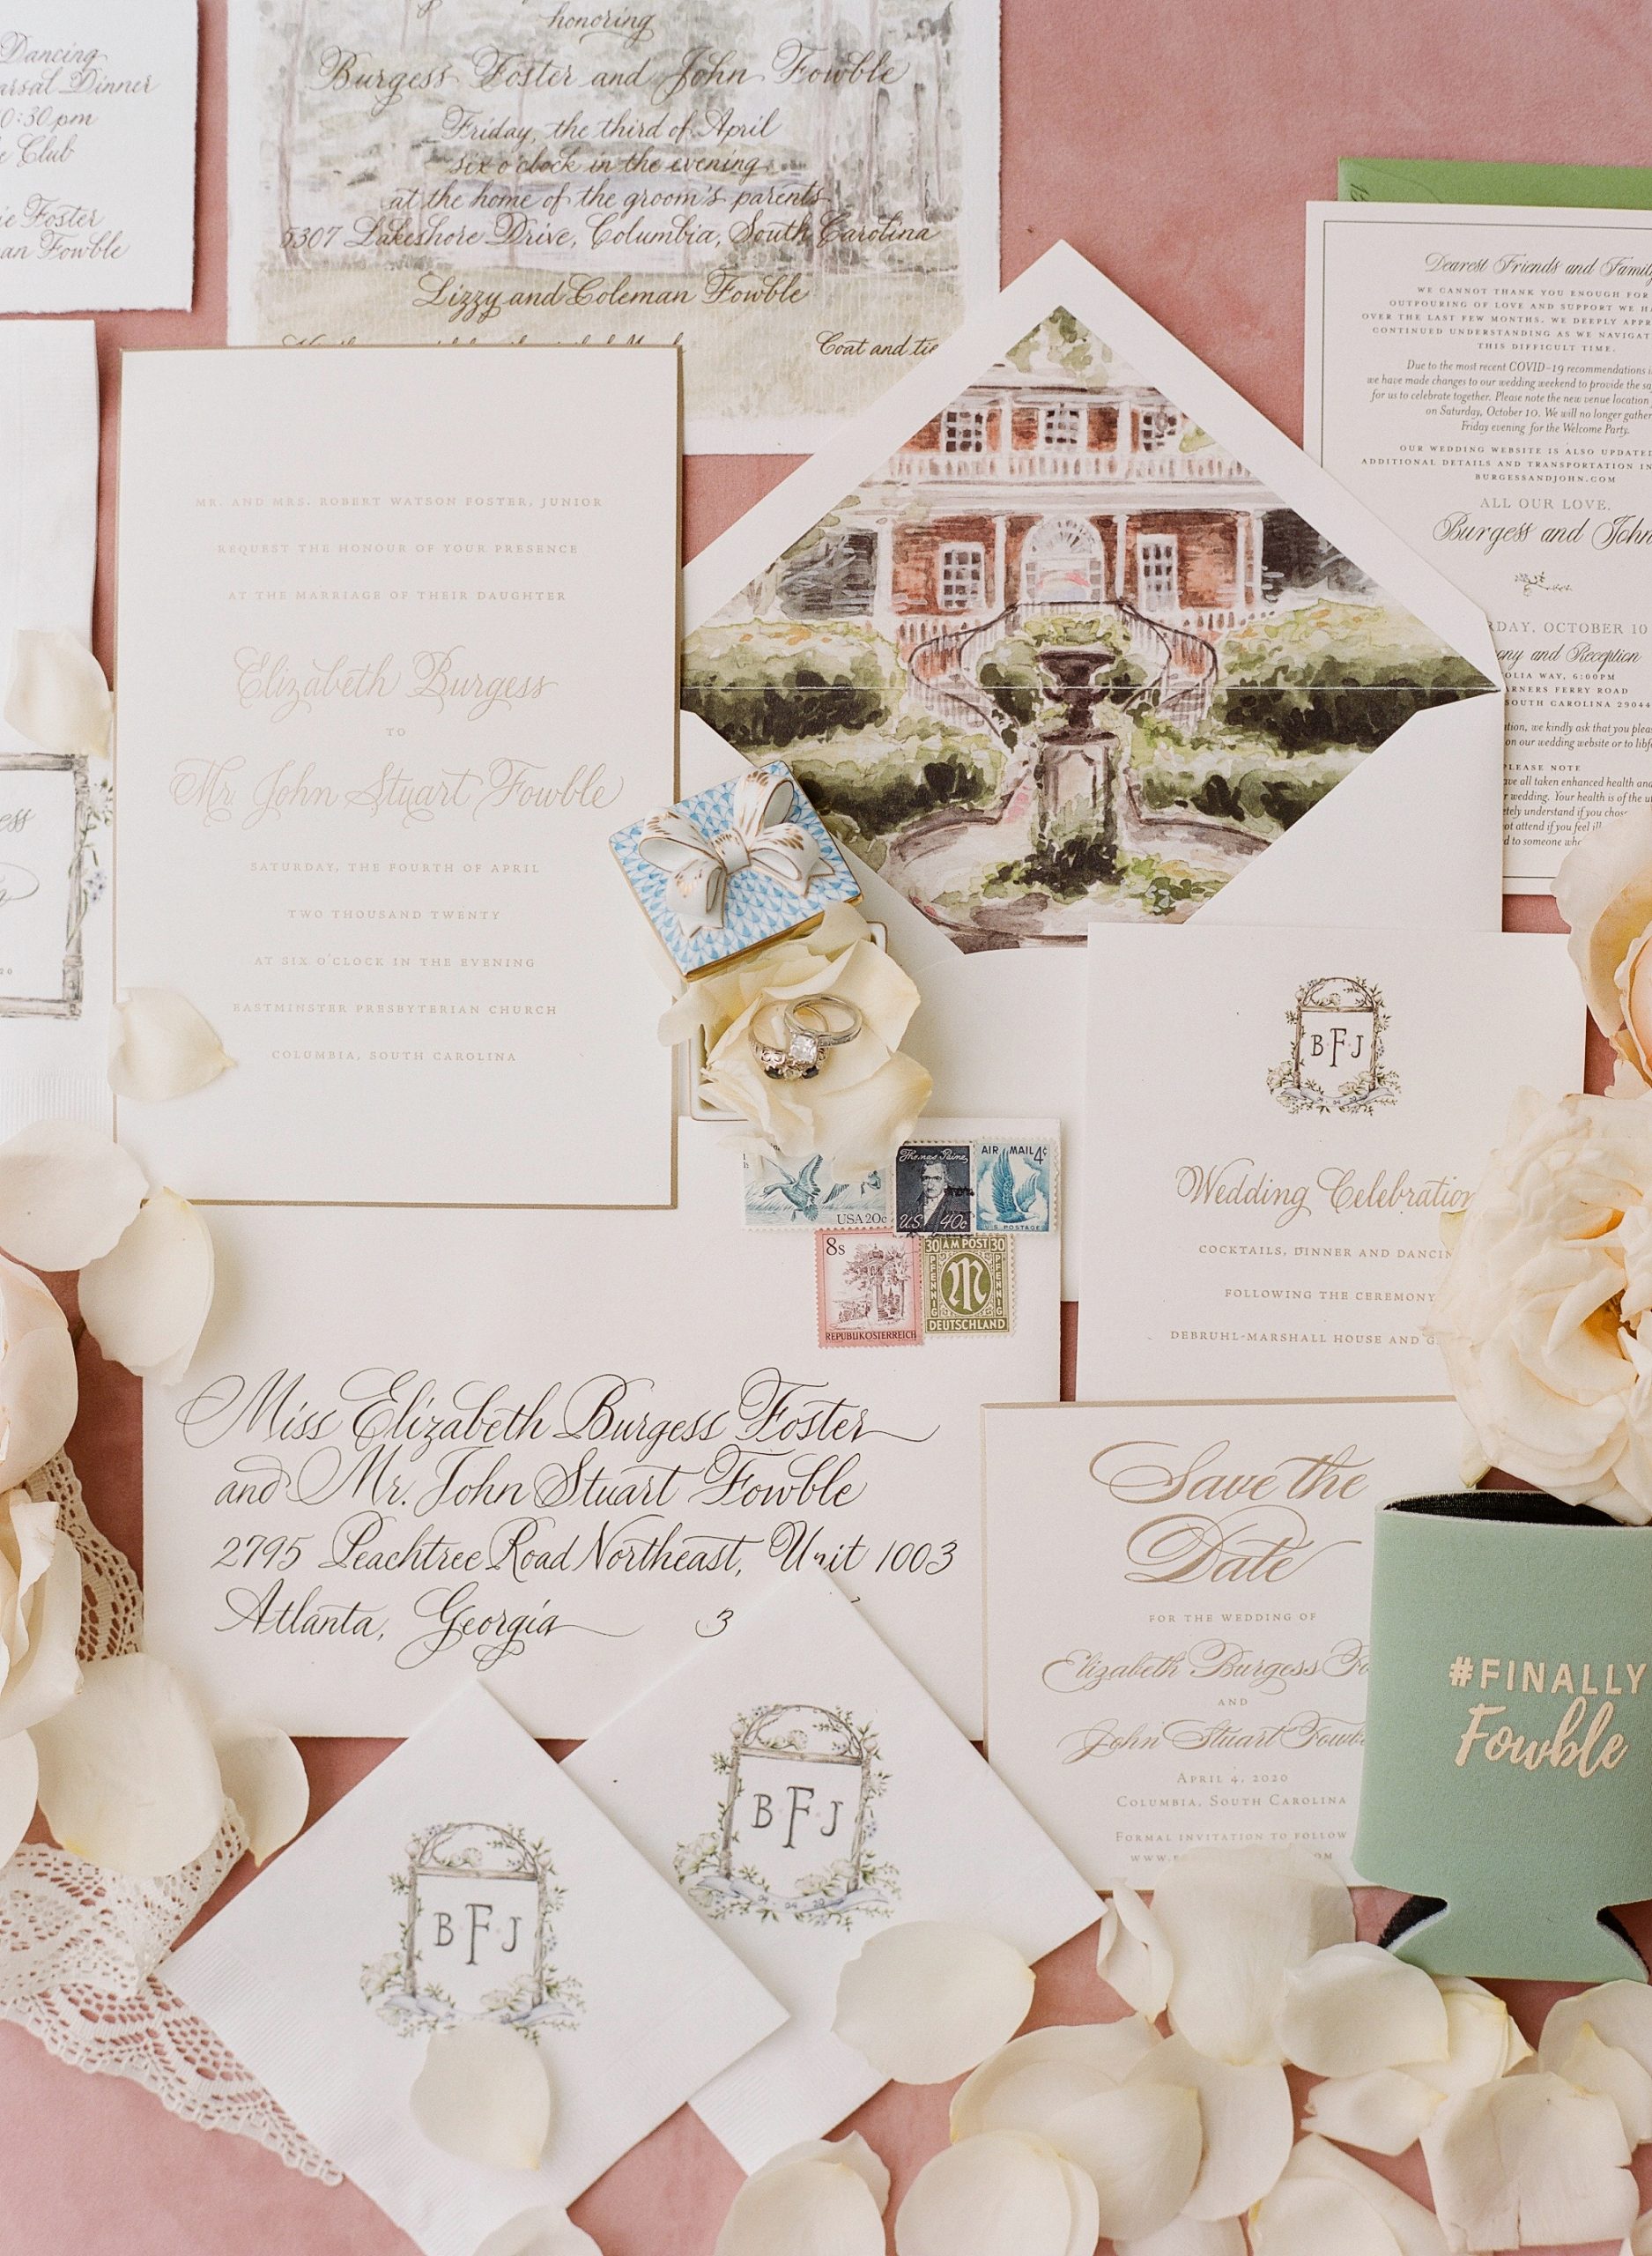  Burgess and her mother, Lib, worked with Martha F. Morris Custom Invitations and Stationery to design the elegant formal wedding invitations and with ByFarr Graphic Design, which created the change the date and COVID information cards.  
